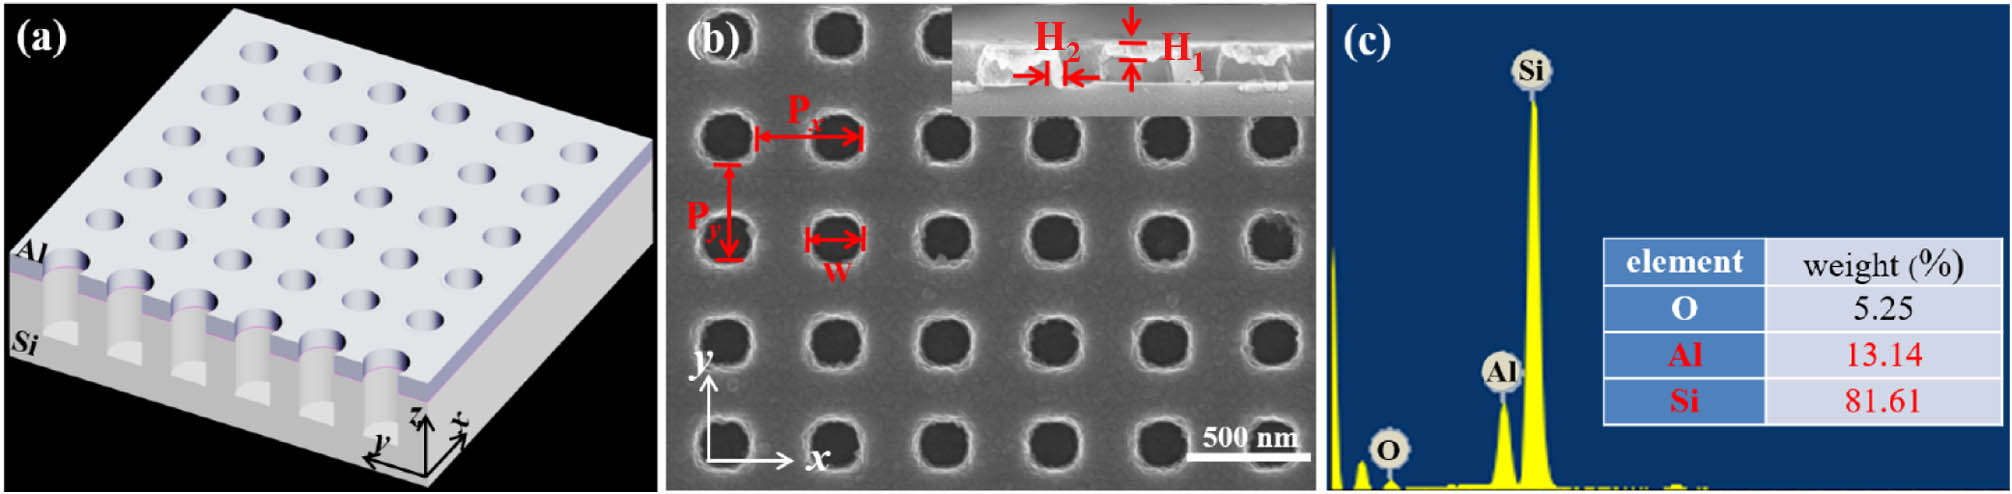 (a) Schematic illustration of the heterostructures. (b) Top-view SEM image of heterostructures, where Px equal to Py denotes the 450 nm period and W the 240 nm width of the nanoholes, H1 the top thickness of 80 nm, and H2 the vertical wall thickness of ∼10 nm. (c) The element components of Al and Si.